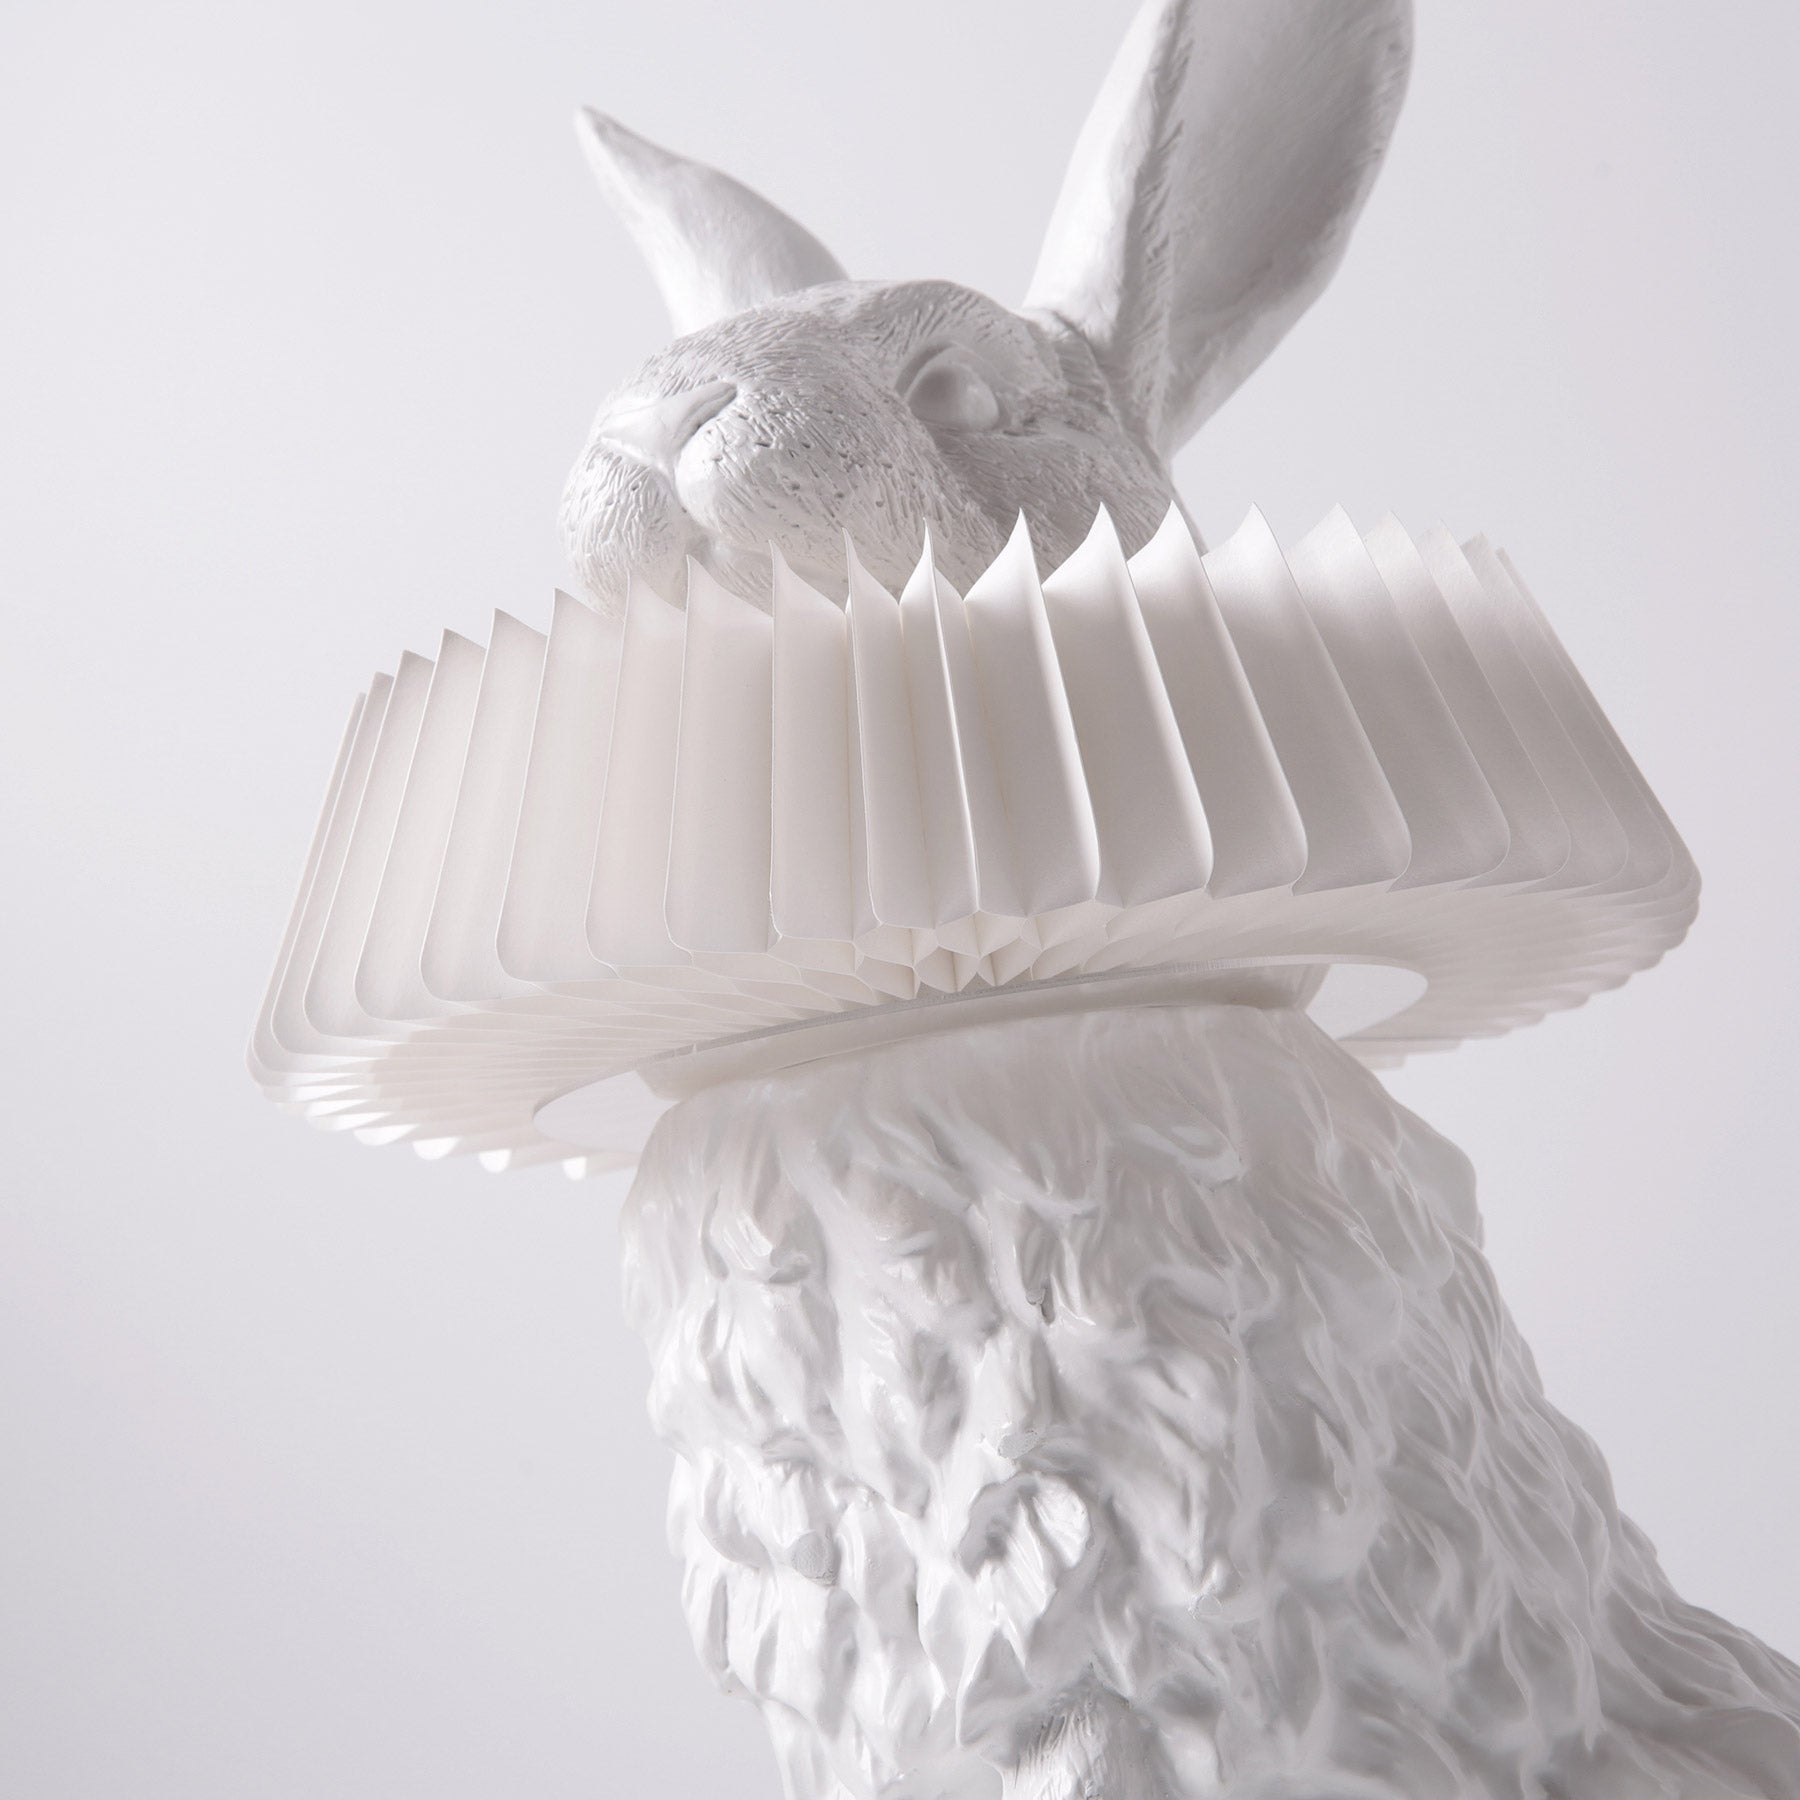 Christmas decorations will be perfect with adorable rabbit lamp